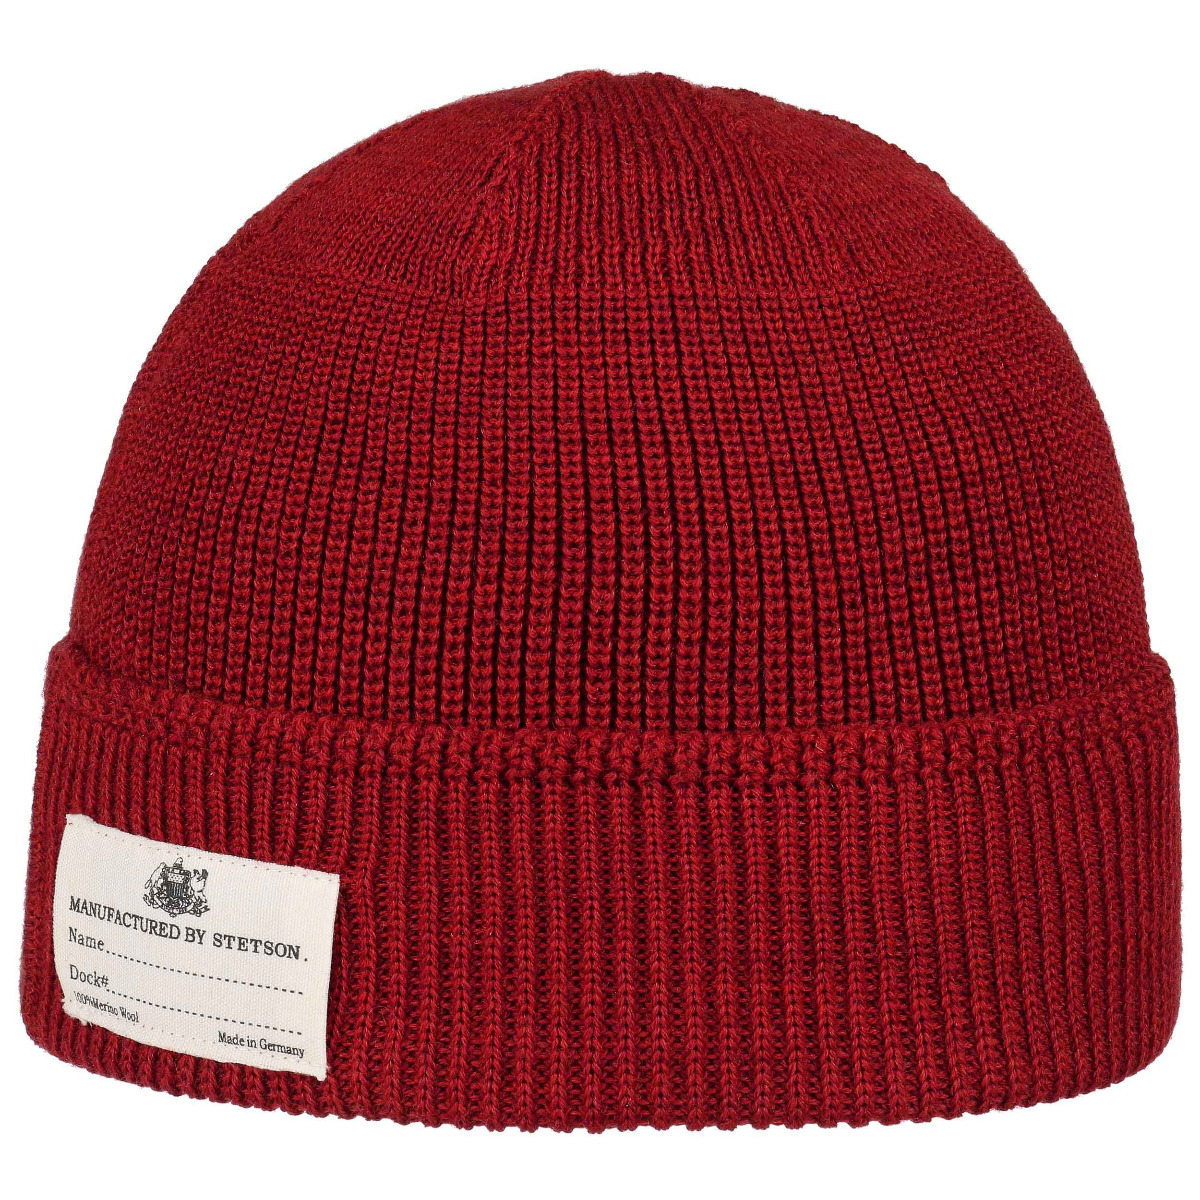 Onalaska Knit Hat with Cuff red